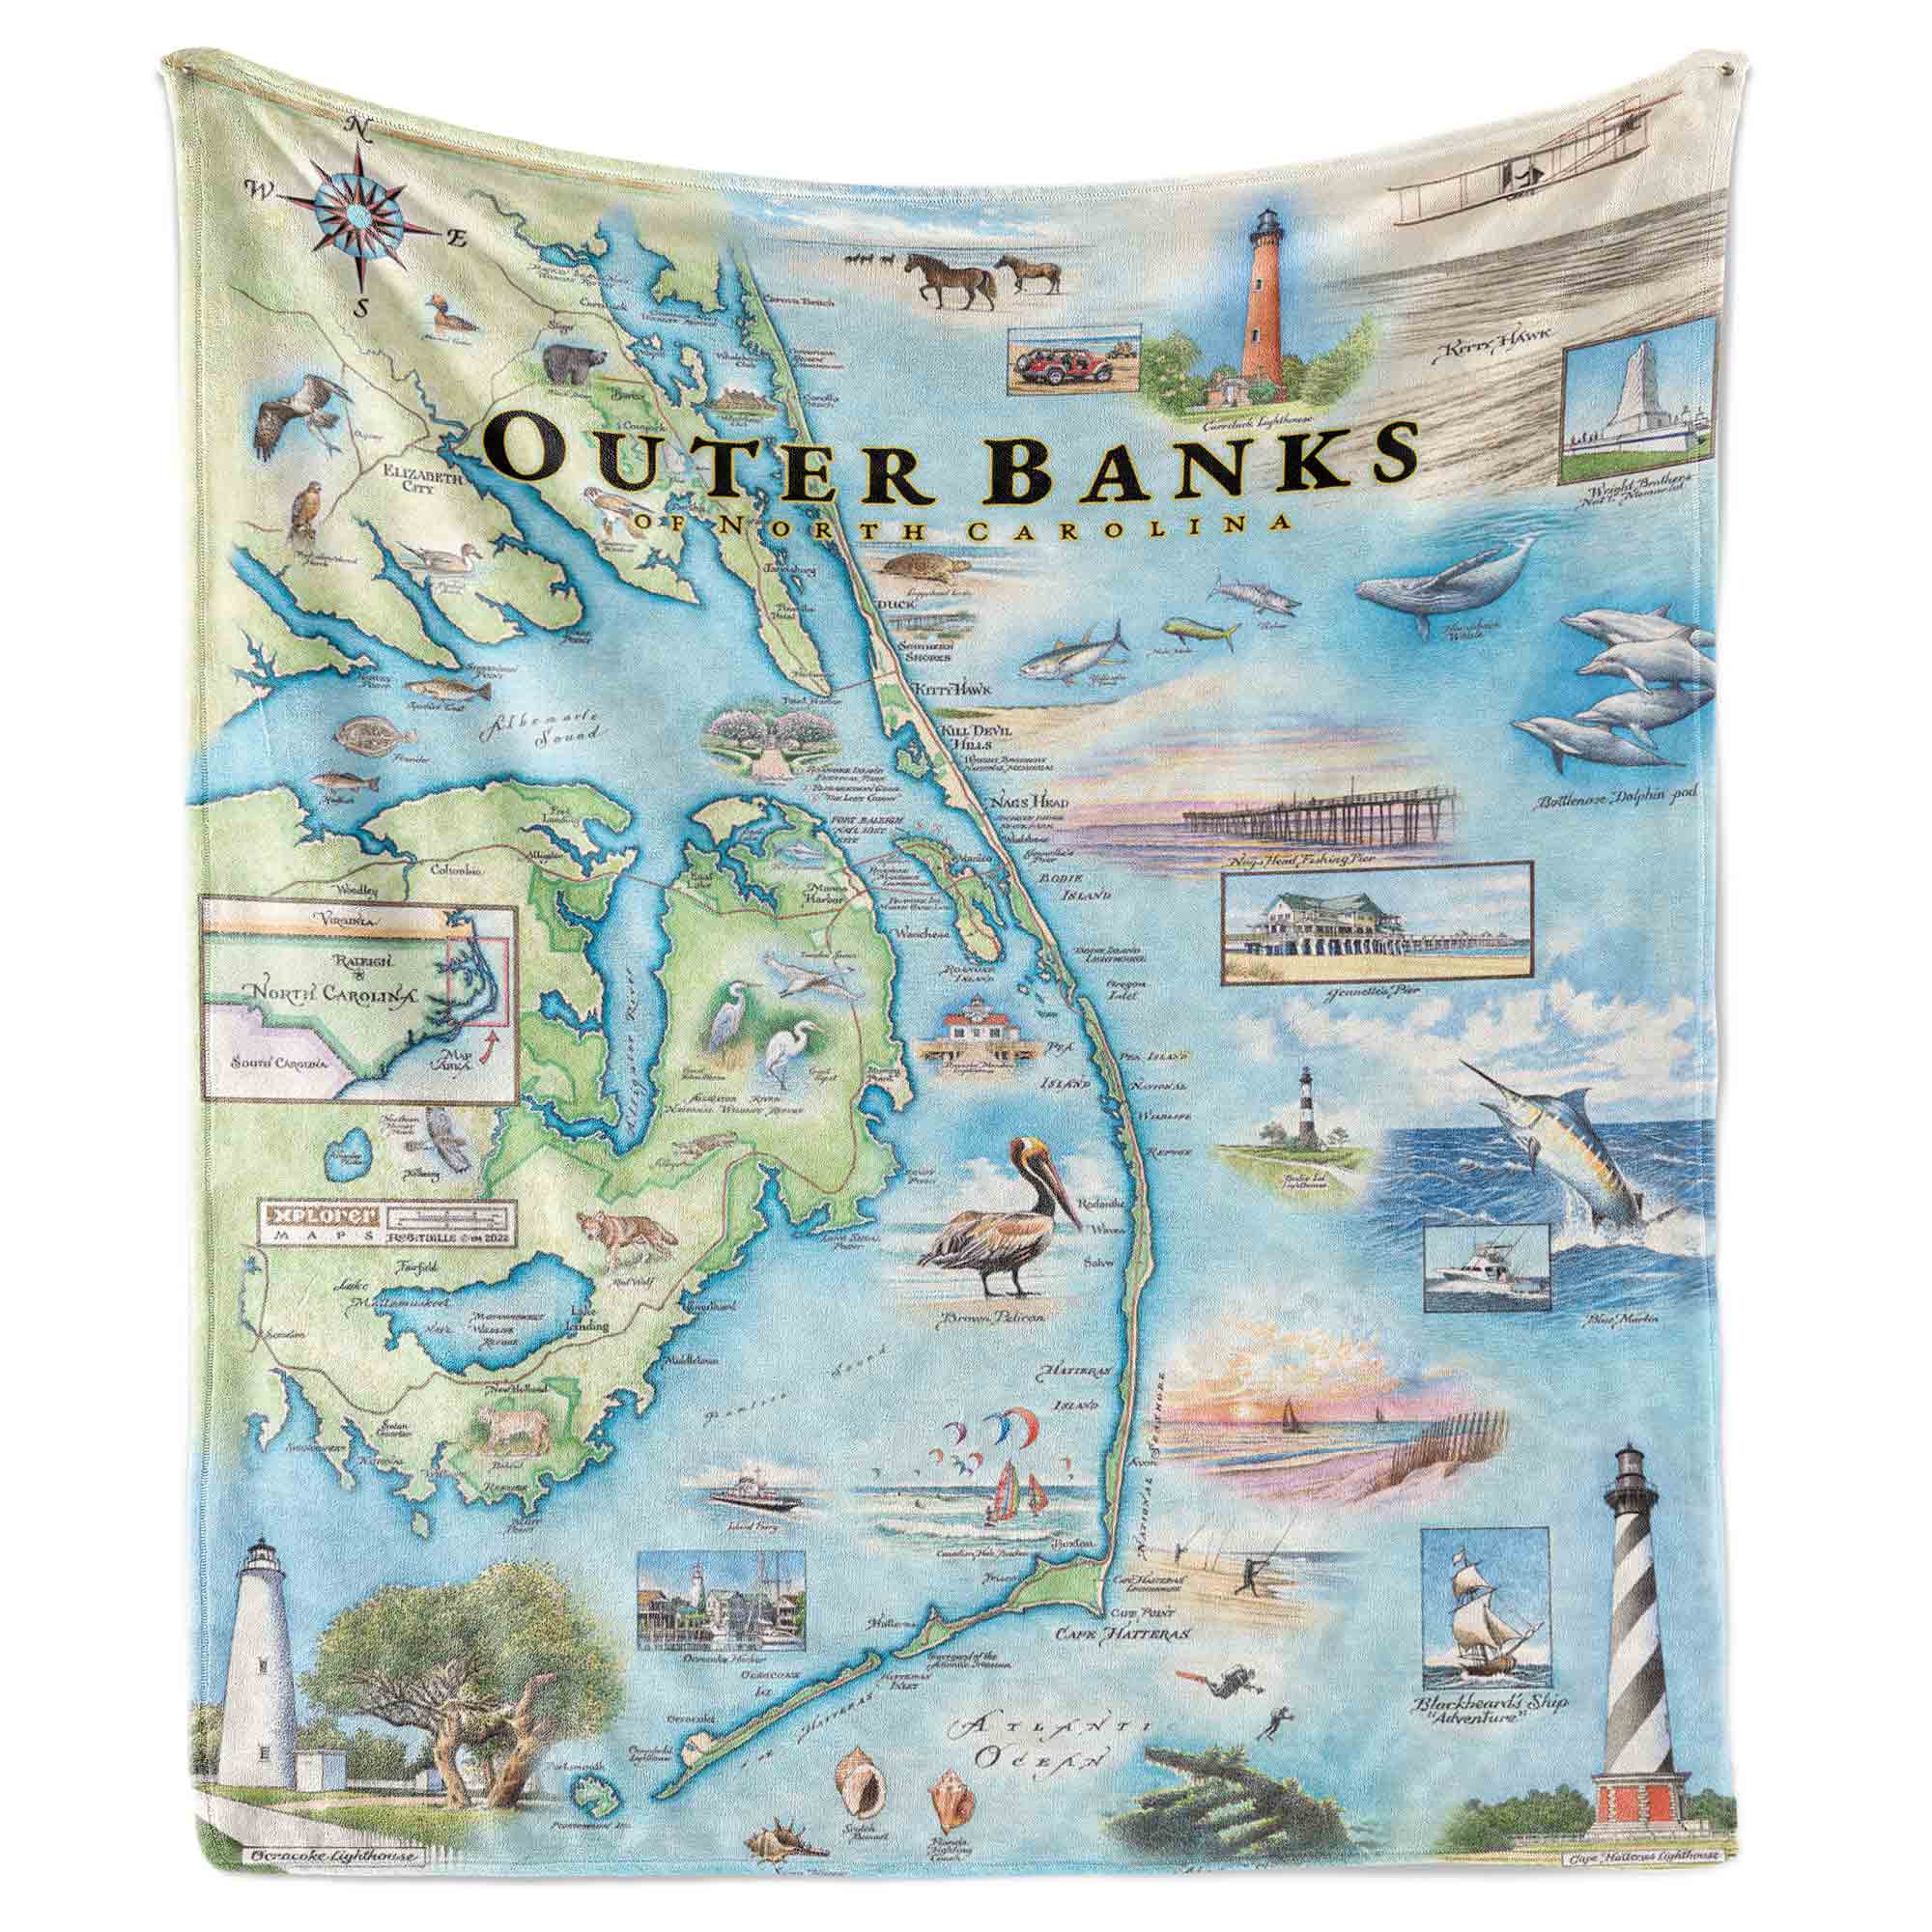 Add a touch of coastal charm to your space with this Outer Banks fleece blanket, hanging gracefully to showcase serene beach scenes, iconic lighthouses, and vibrant marine life. It's the perfect decorative accent for bringing the beauty of North Carolina's beloved destination into your home.